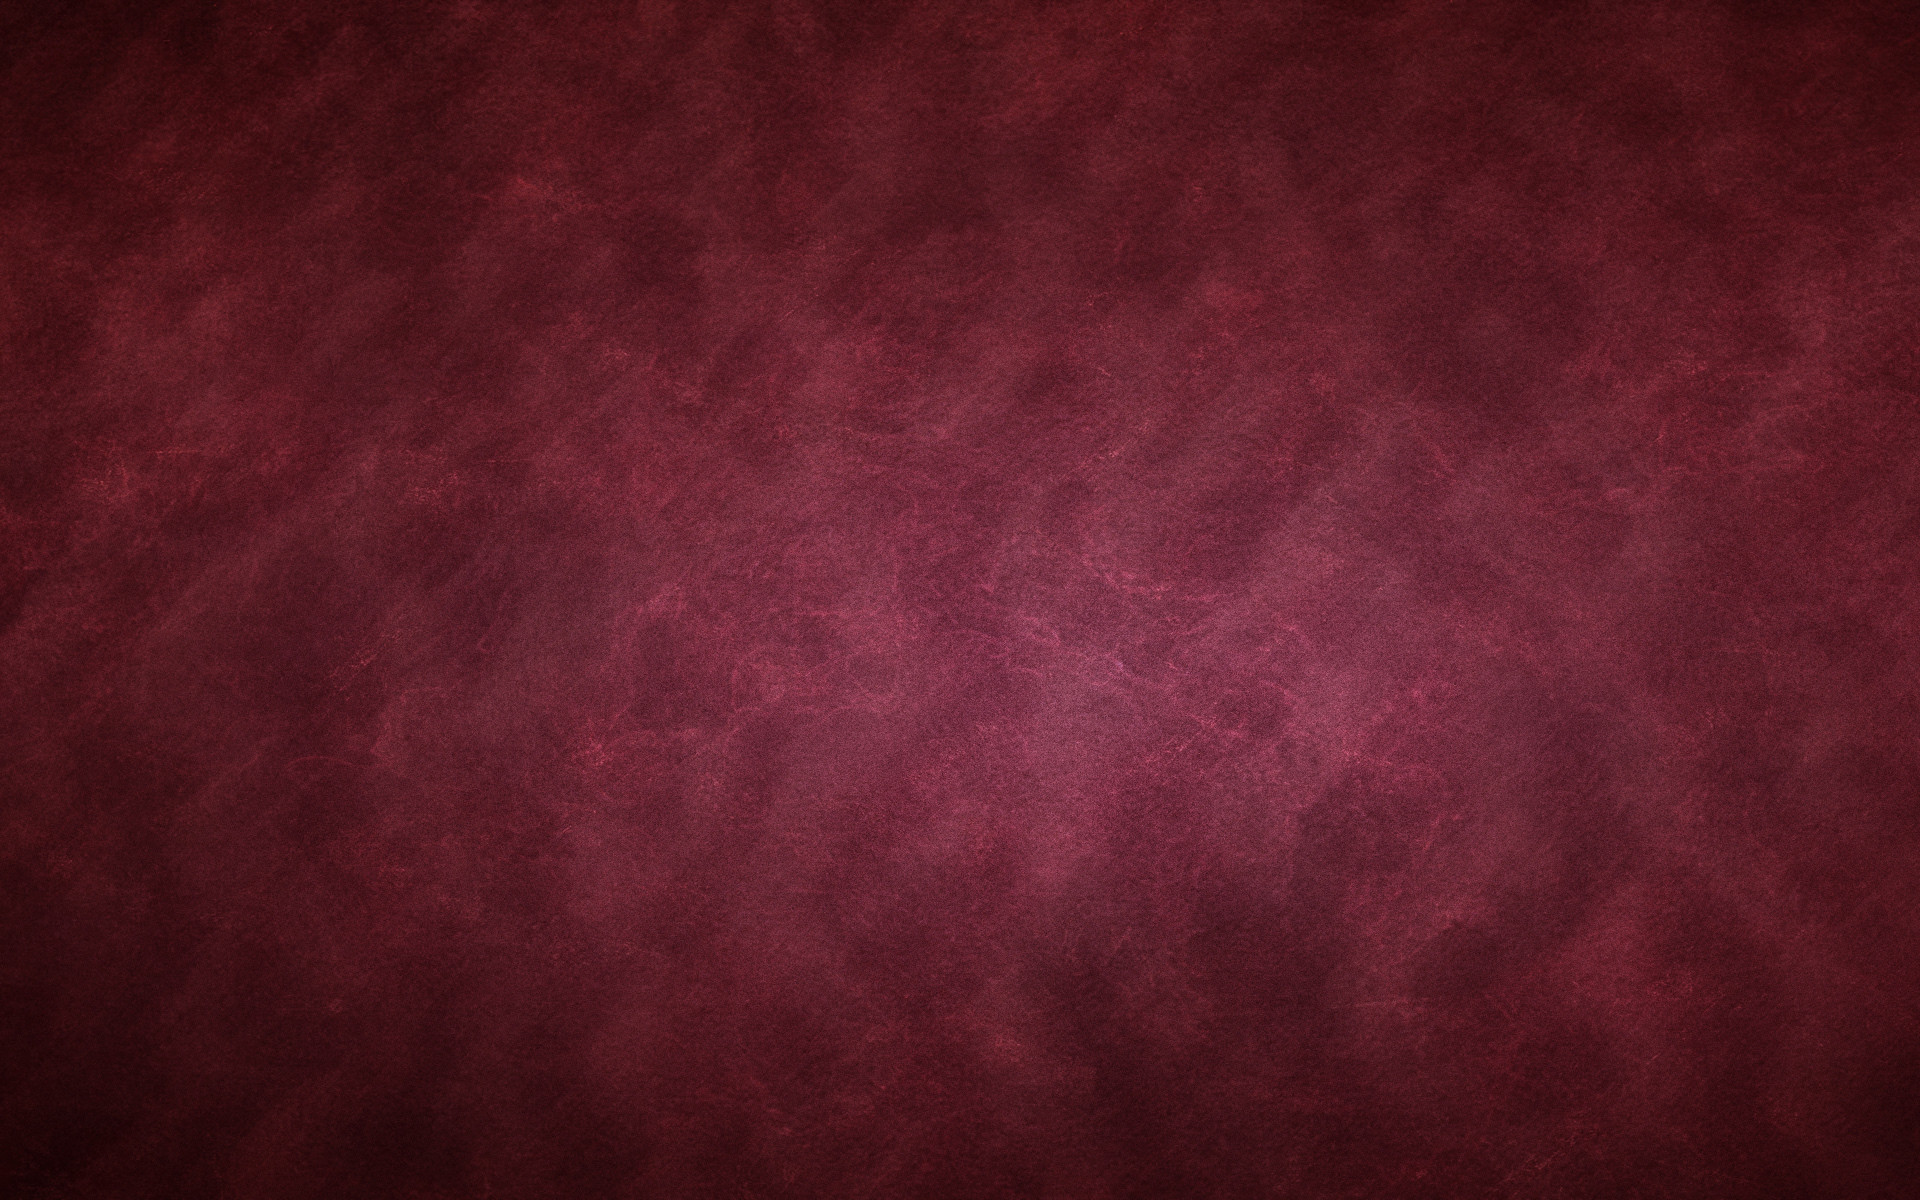 free-download-blank-card-with-burgundy-background-zazzlecom-blank-cards